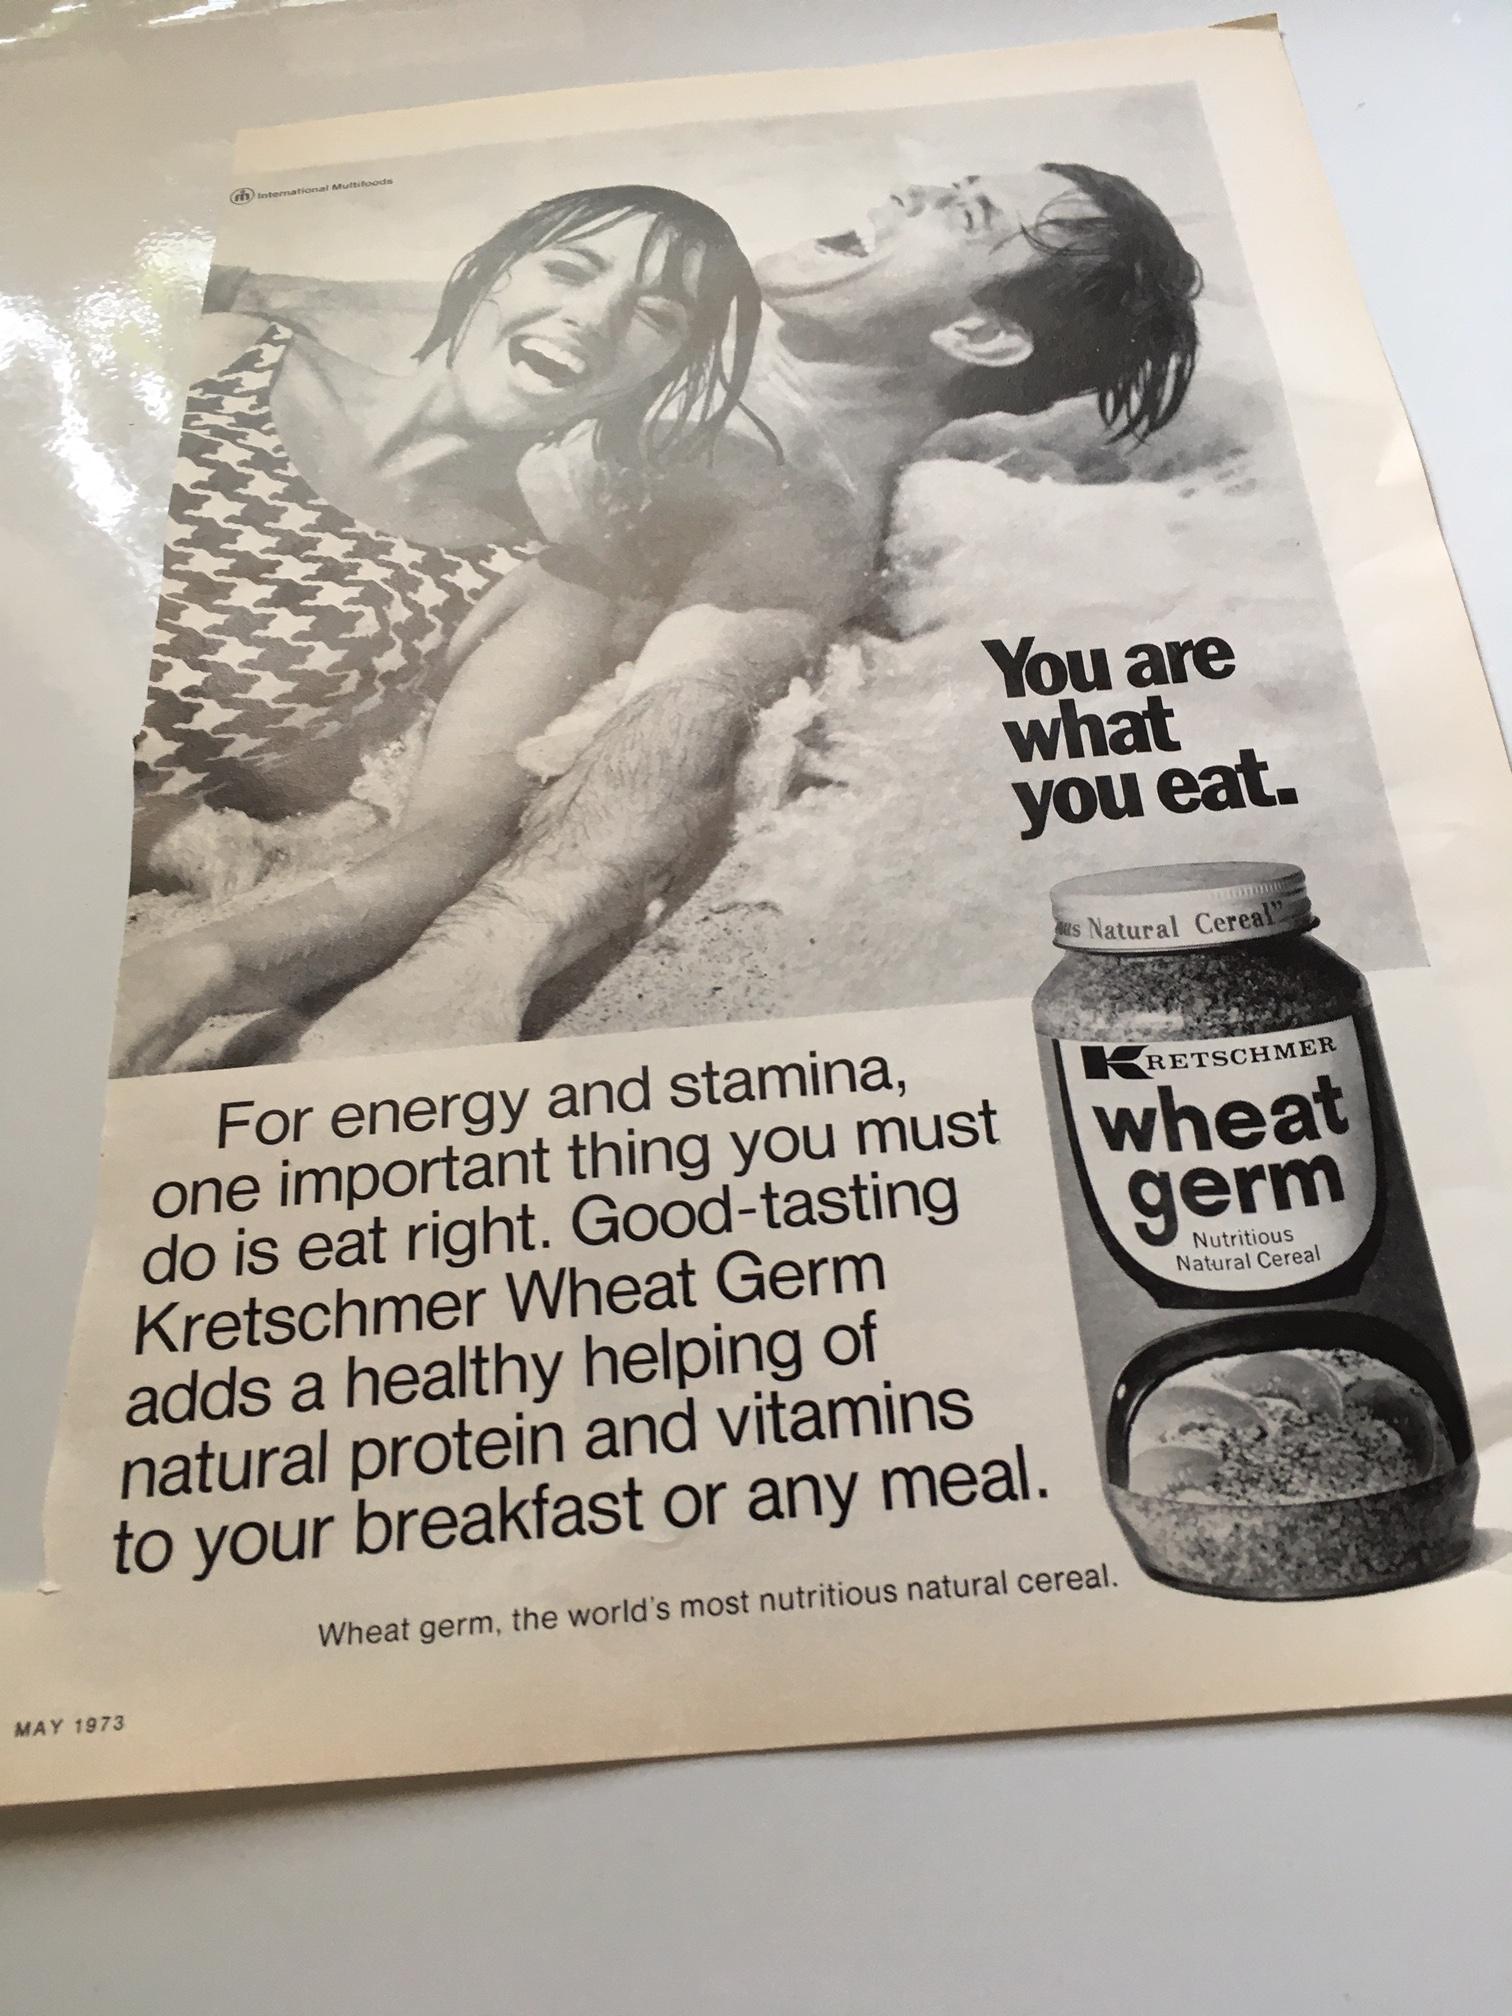 What Happened to Wheat Germ?